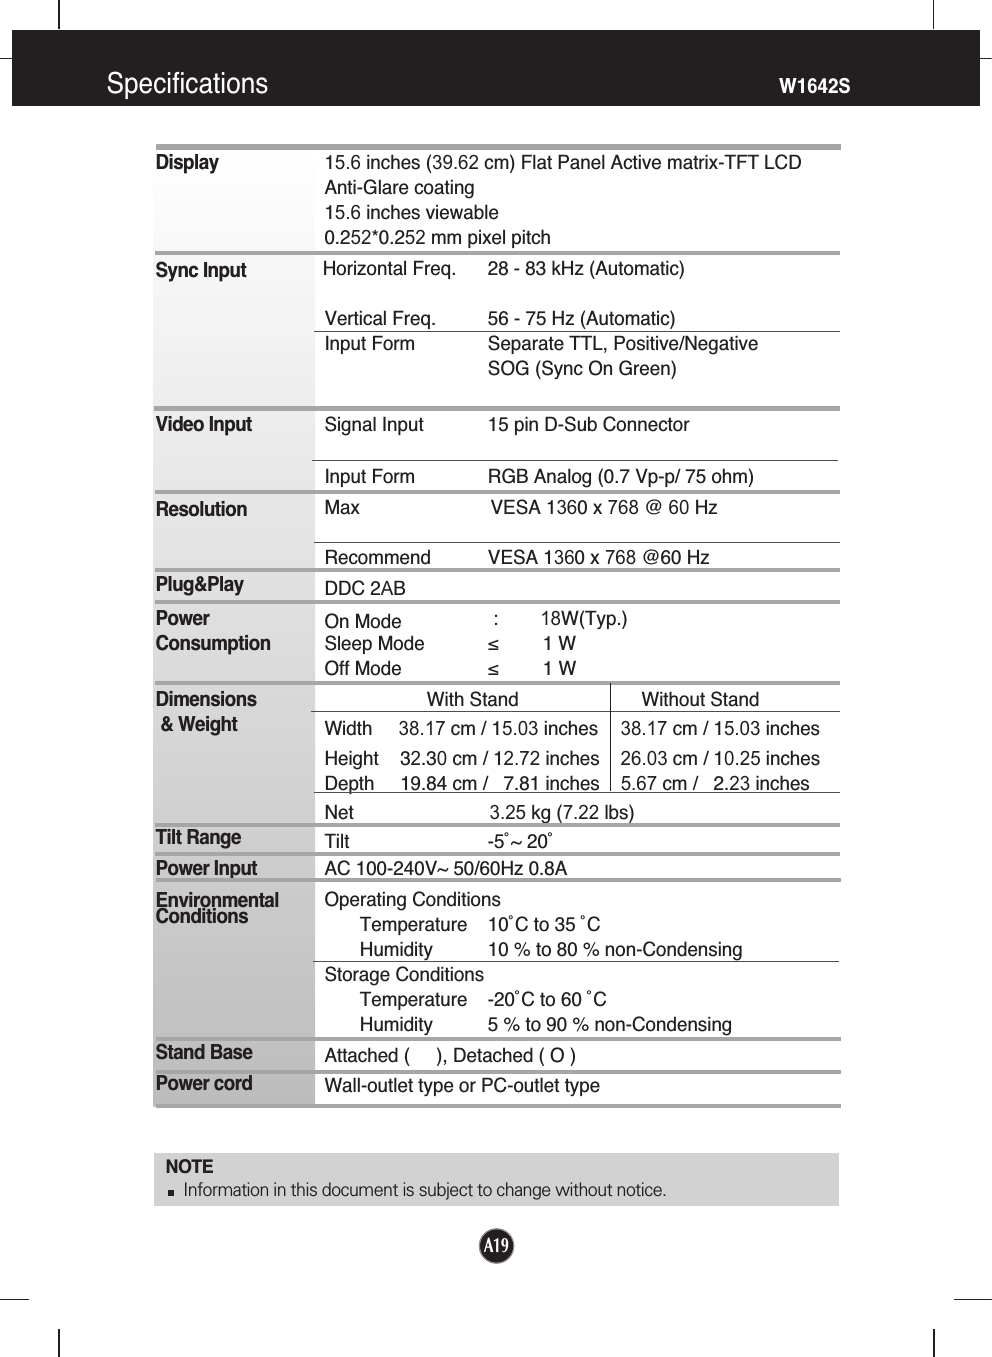 A19A19Specifications                                                                      W1642SNOTEInformation in this document is subject to change without notice.DisplaySync InputVideo InputResolutionPlug&amp;PlayPowerConsumptionDimensions&amp; WeightTilt RangePower InputEnvironmentalConditionsStand BasePower cord 15.6 inches (39.62 cm) Flat Panel Active matrix-TFT LCD Anti-Glare coating 15.6 inches viewable0.252*0.252 mm pixel pitchHorizontal Freq.      28 - 83 kHz (Automatic)  Vertical Freq. 56 - 75 Hz (Automatic)Input Form Separate TTL, Positive/NegativeSOG (Sync On Green)   Signal Input 15 pin D-Sub Connector  Input Form RGB Analog (0.7 Vp-p/ 75 ohm)Max                         VESA 1360 x 768 @ 60 Hz  Recommend VESA 1360 x 768 @60 HzDDC 2ABOn Mode :        18W(Typ.)Sleep Mode ≤ 1 WOff Mode ≤ 1 WWith Stand Without StandWidth     38.17 cm / 15.03 inches   38.17 cm / 15.03 inchesHeight 32.30 cm / 12.72 inches    26.03 cm / 10.25 inches Depth 19.84 cm /   7.81 inches    5.67 cm /   2.23 inchesNet                          3.25 kg (7.22 lbs)Tilt -5˚~ 20˚AC 100-240V~ 50/60Hz 0.8A Operating ConditionsTemperature 10˚C to 35 ˚CHumidity 10 % to 80 % non-CondensingStorage ConditionsTemperature -20˚C to 60 ˚CHumidity 5 % to 90 % non-CondensingAttached (     ), Detached ( O )Wall-outlet type or PC-outlet type